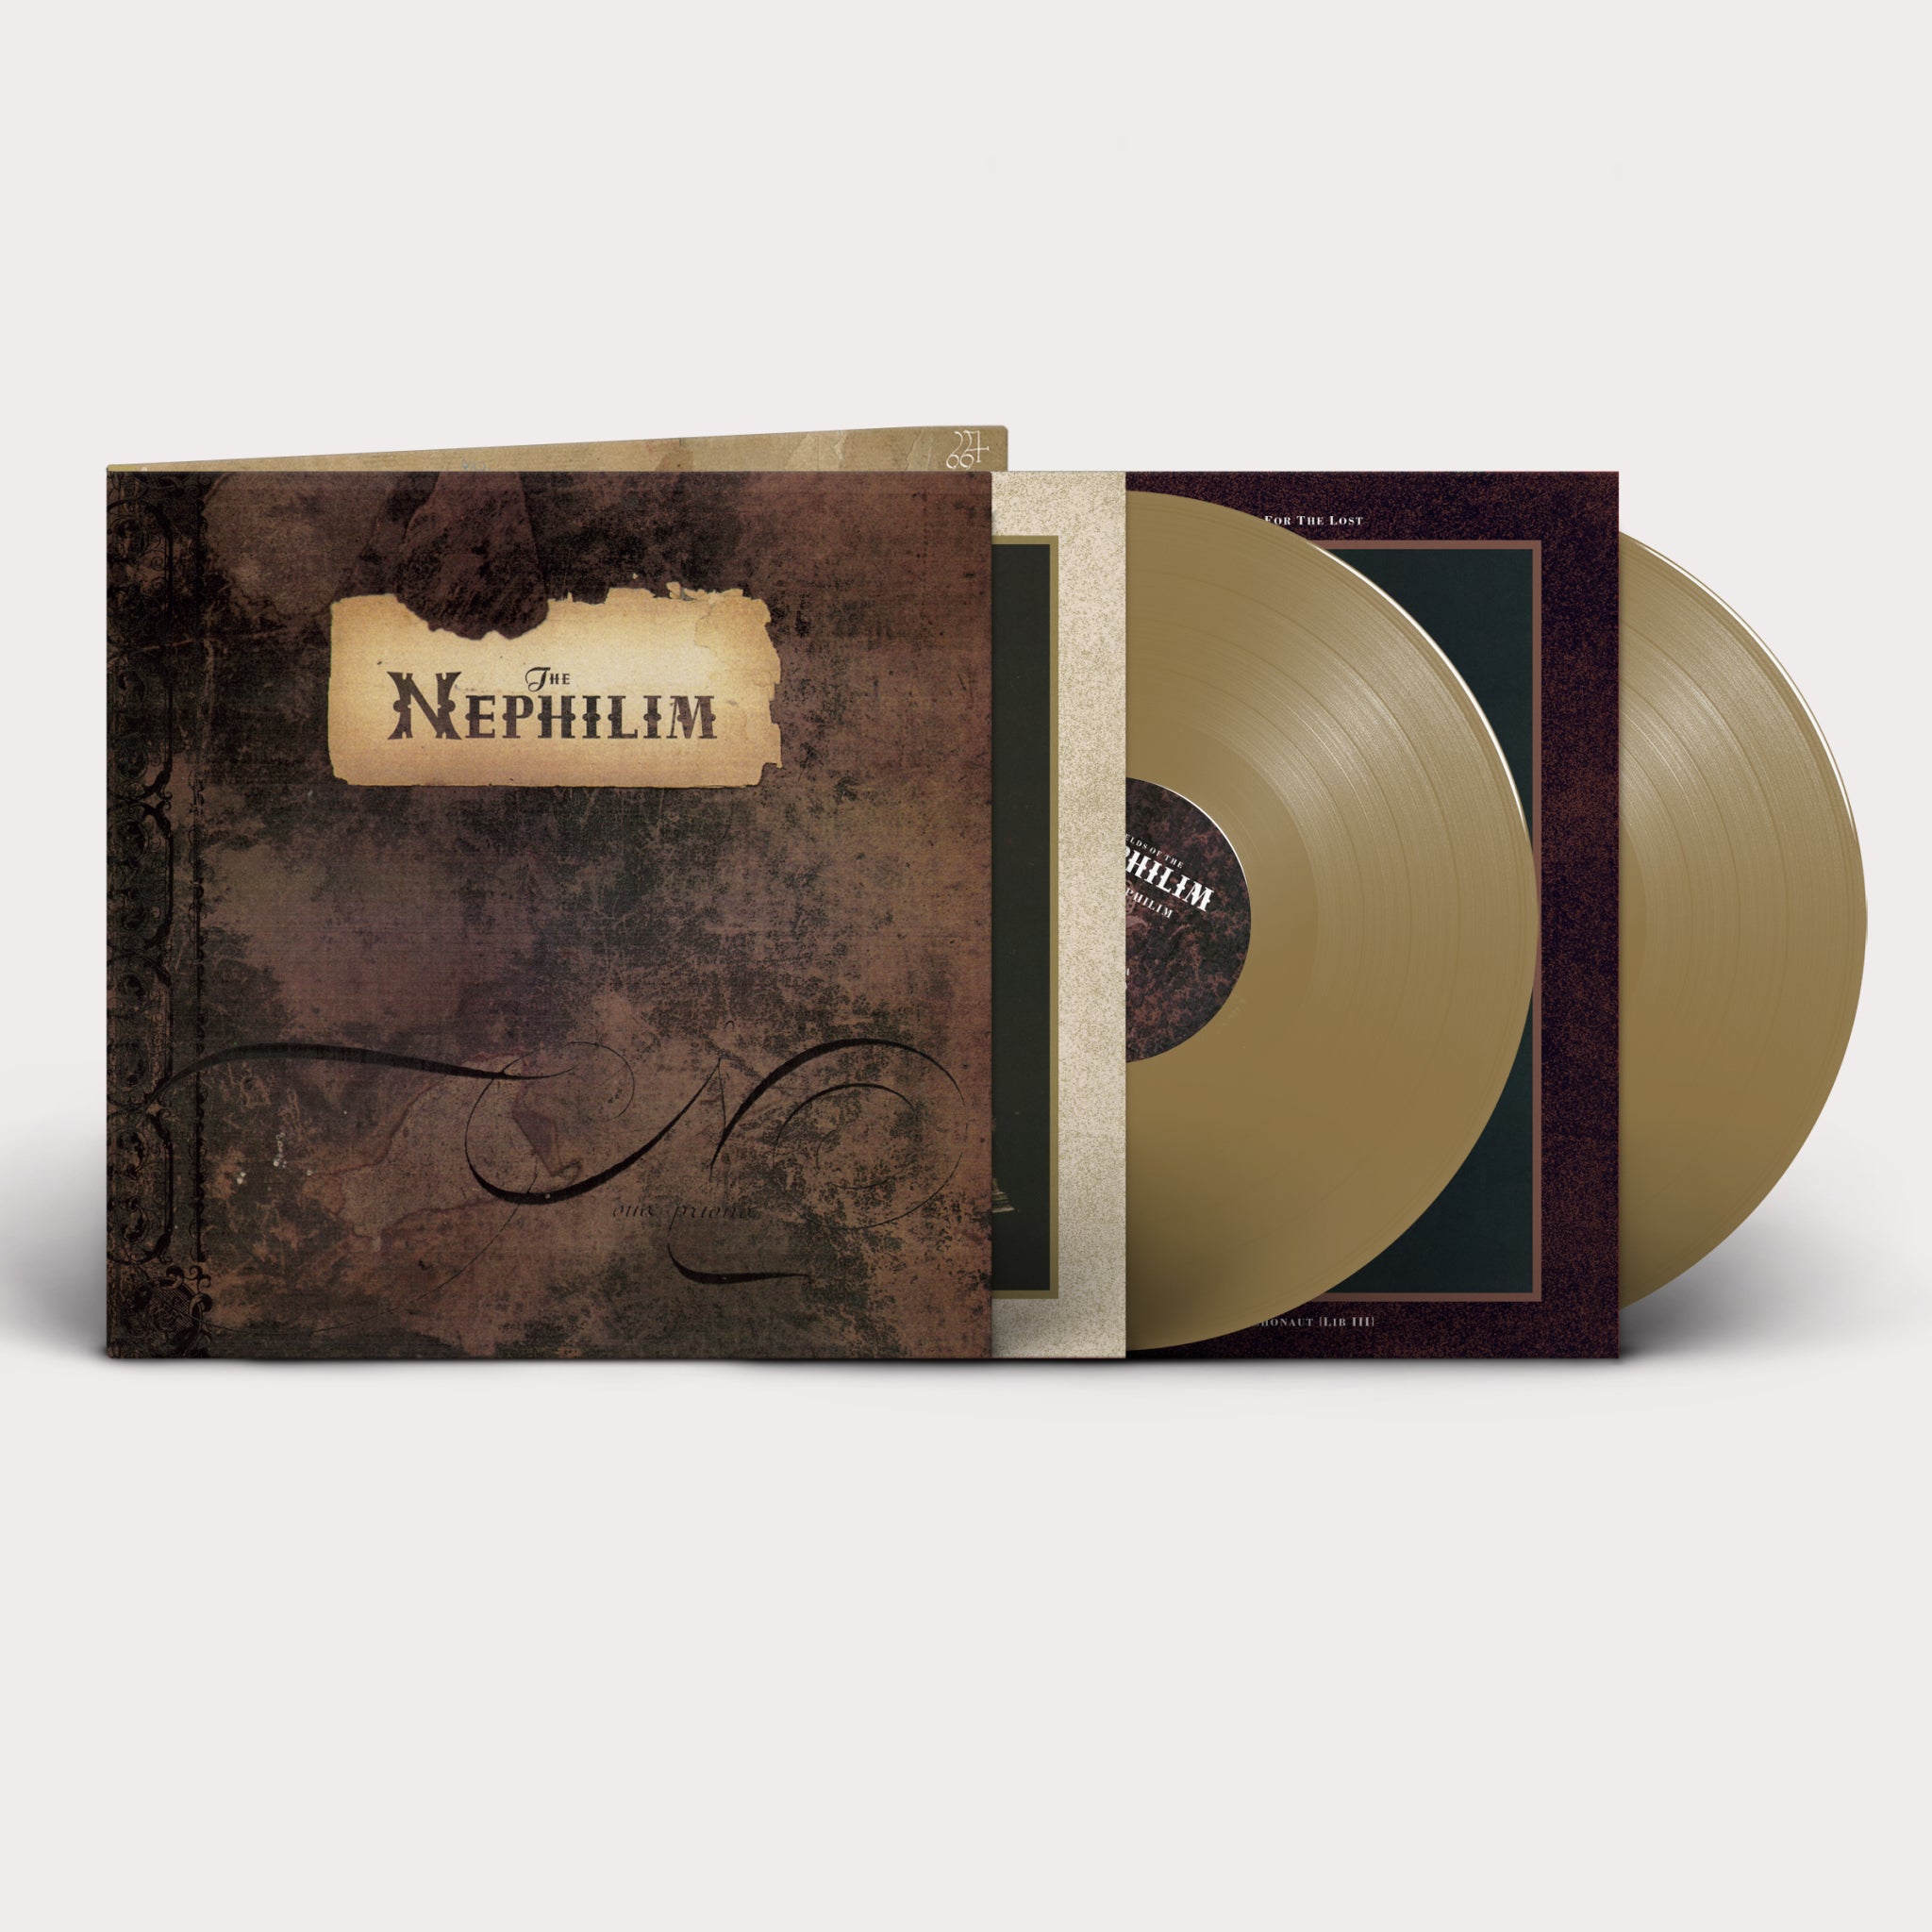 Fields Of The Nephilim - The Nephilim - Expanded Edition (35th Anniversary): Limited Golden Brown Vinyl 2LP